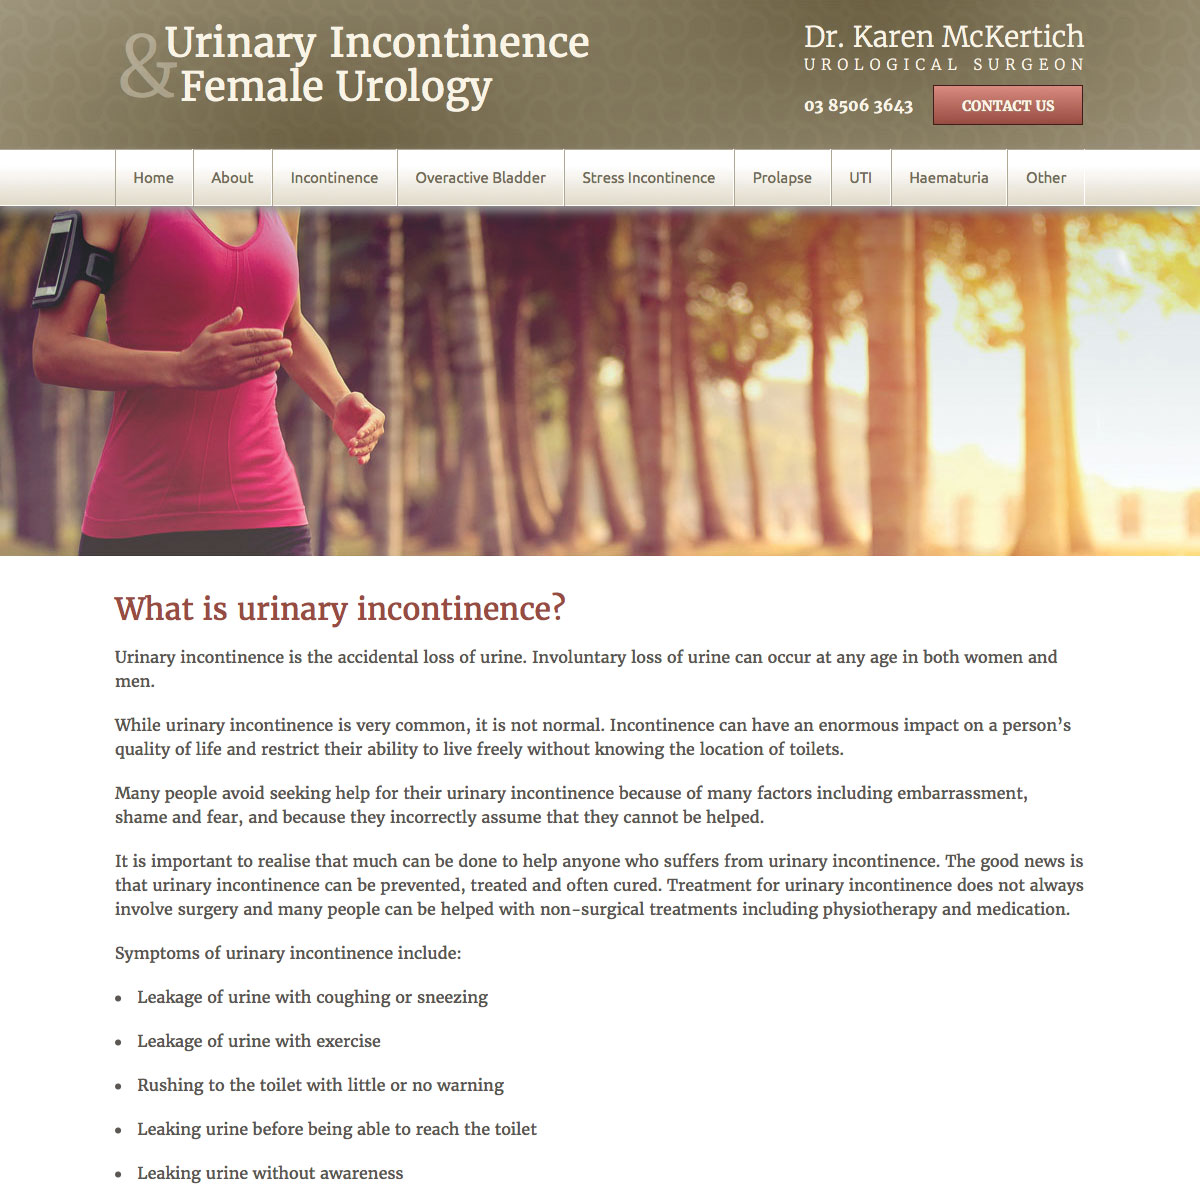 Urinary Incontinence and Female Urology - Content Page